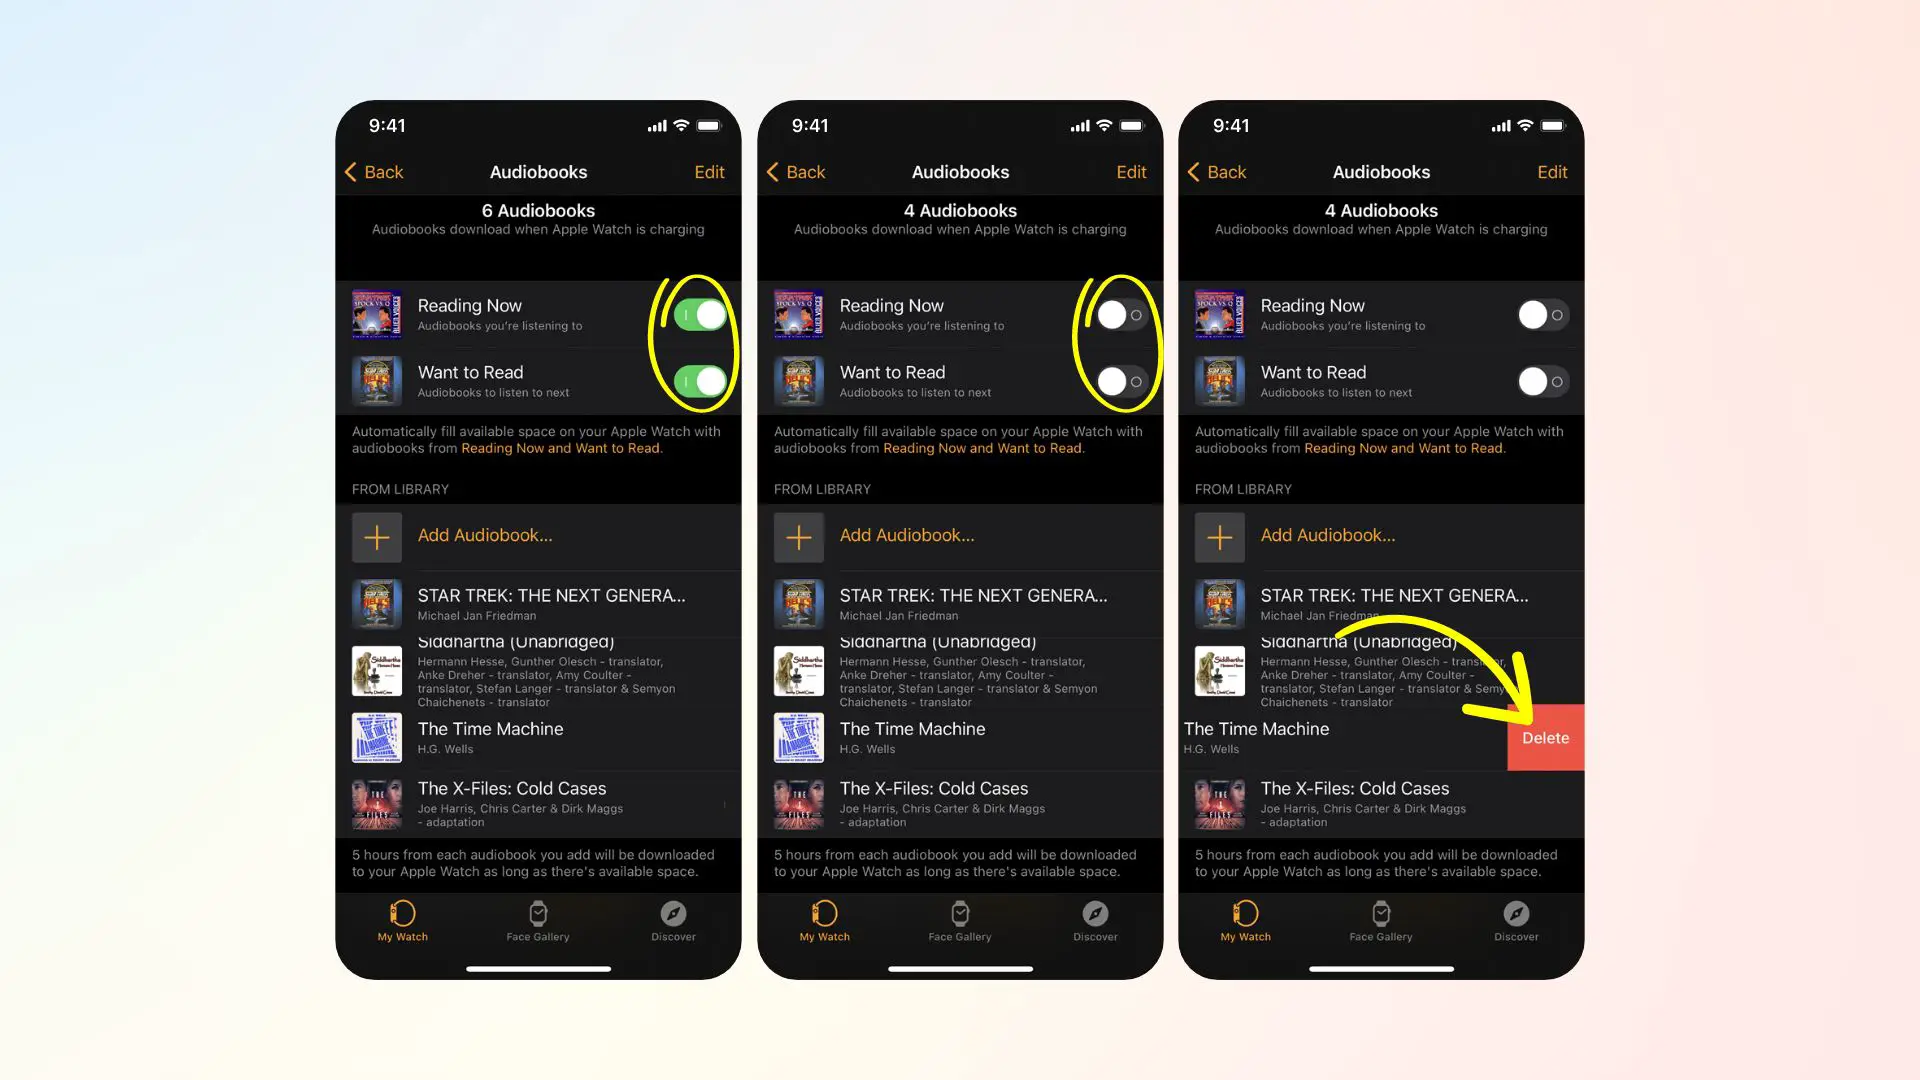 Steps on how to free up storage on Apple Watch by removing audiobooks from your iPhone